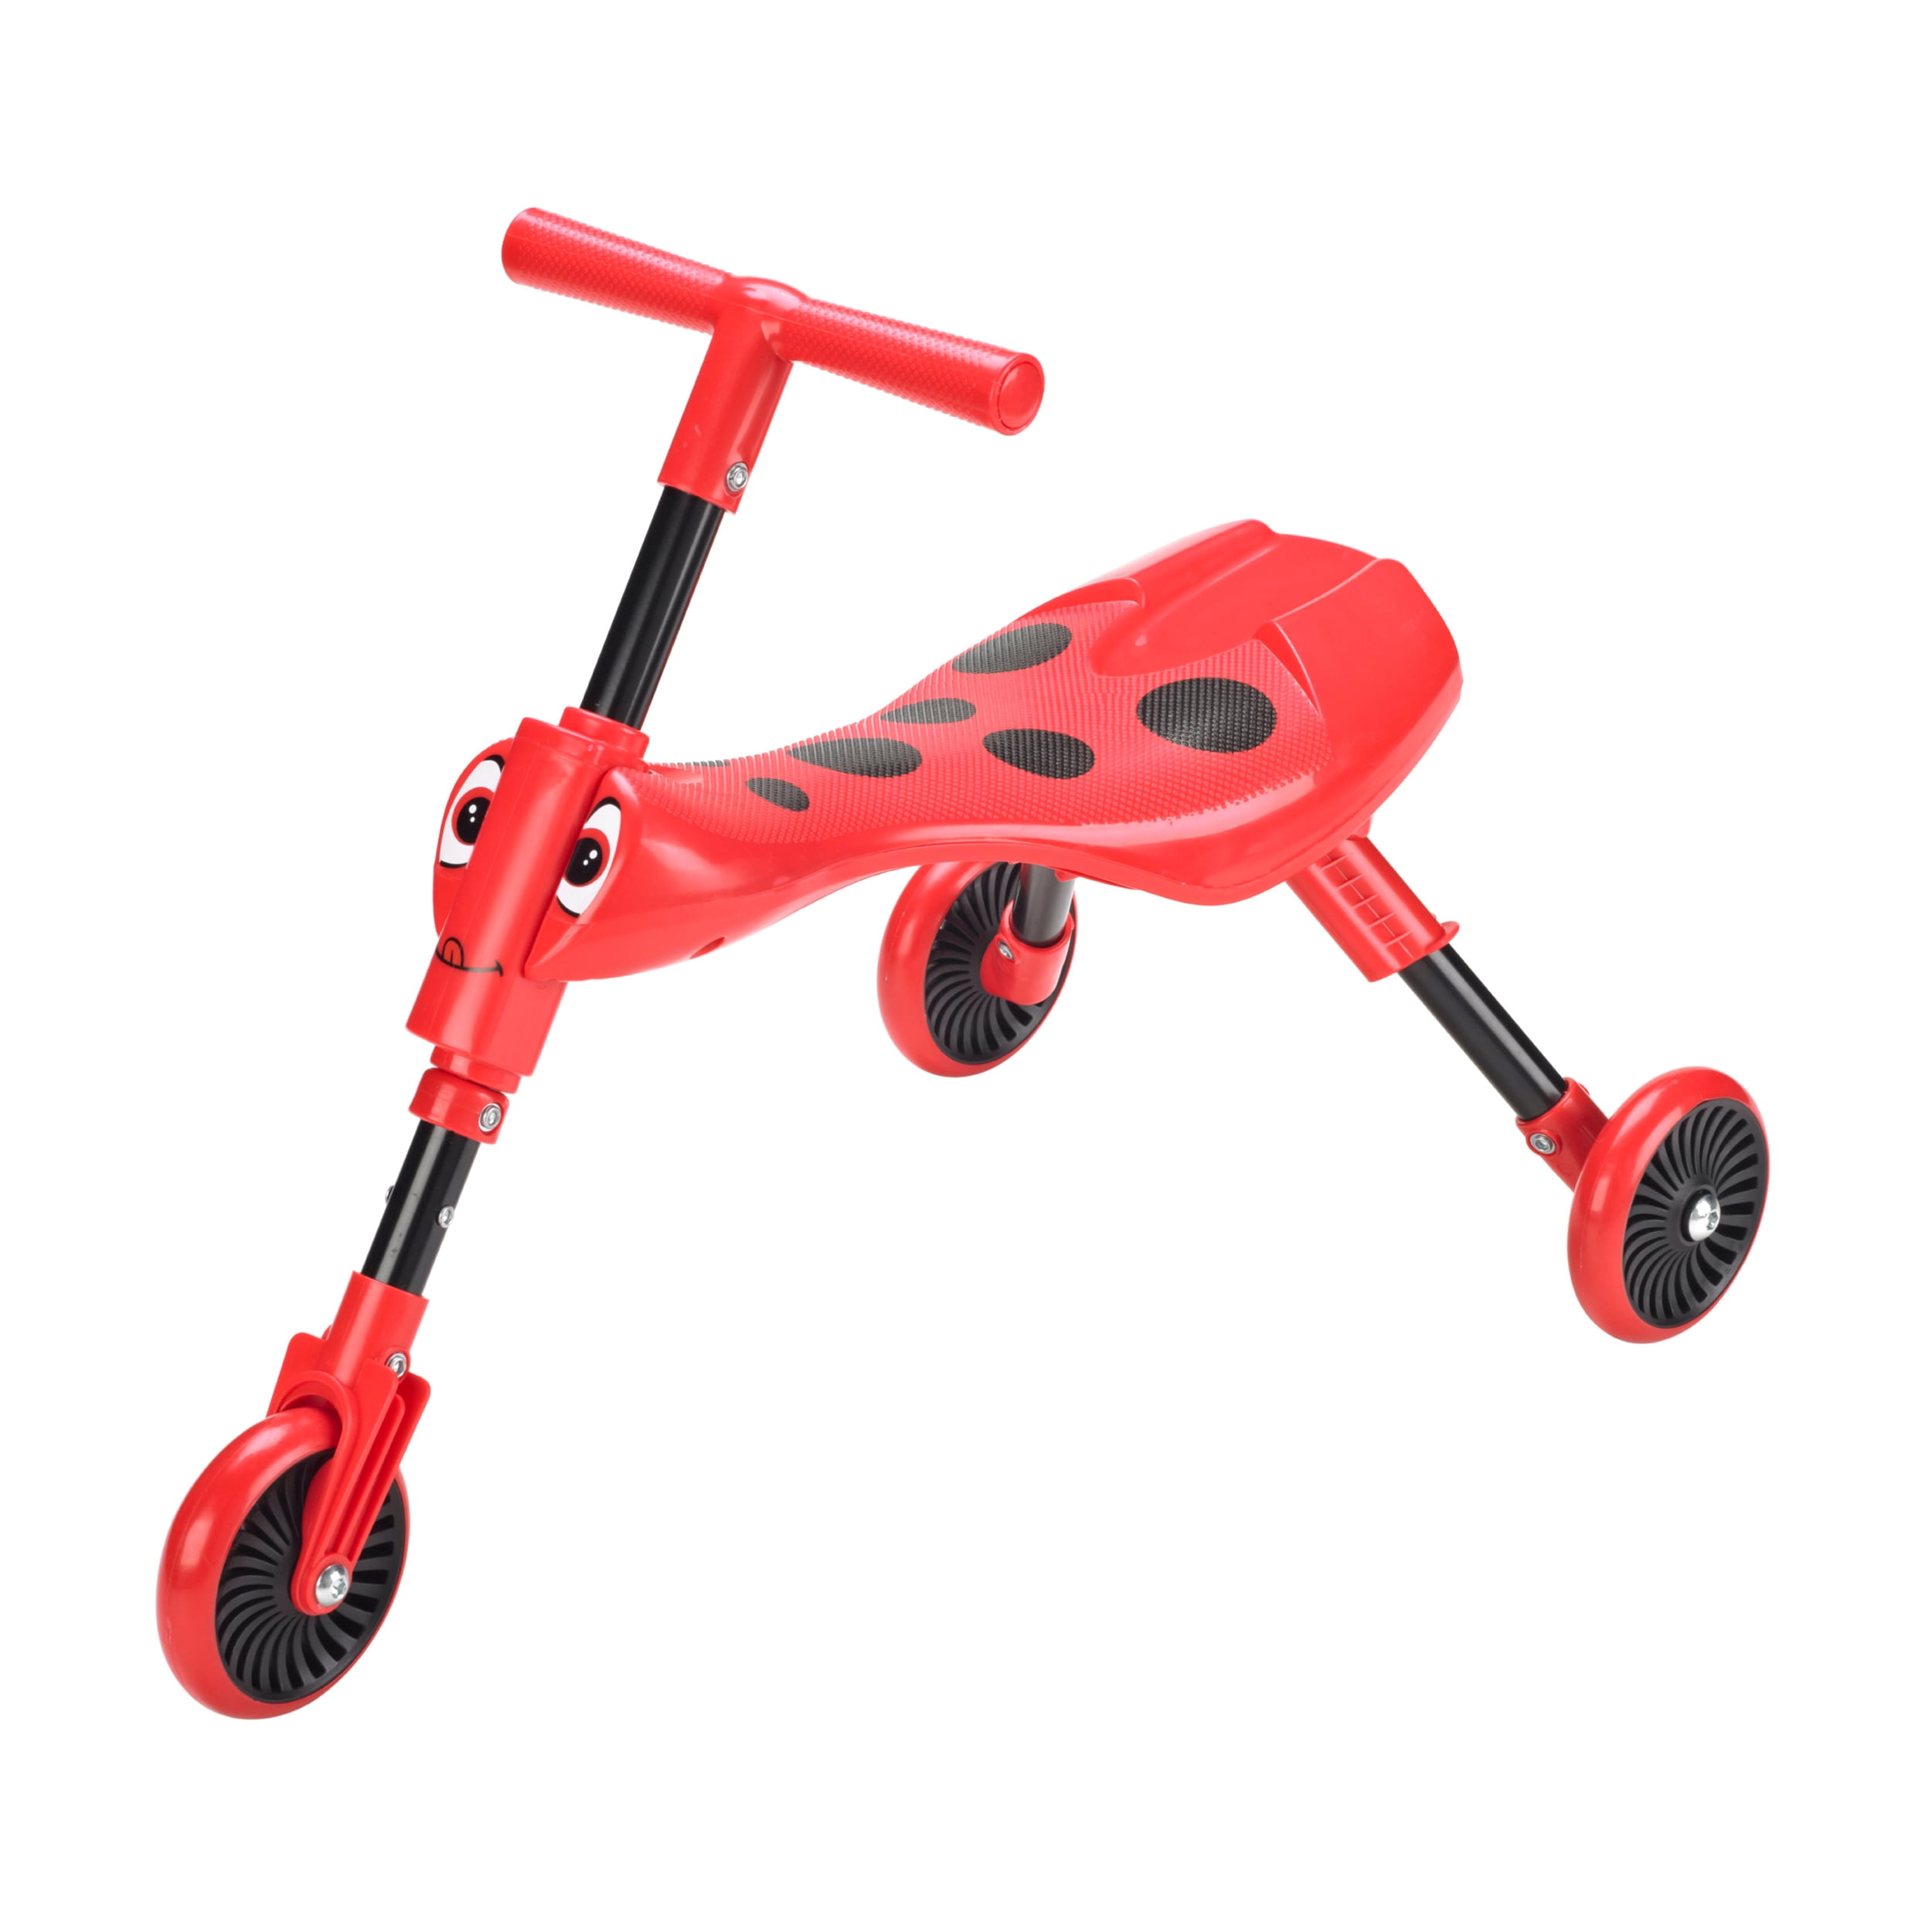 Scuttlebug Beetle, Cherry Red Ride On Tricycle with 9" seat height. Ages 1-3.